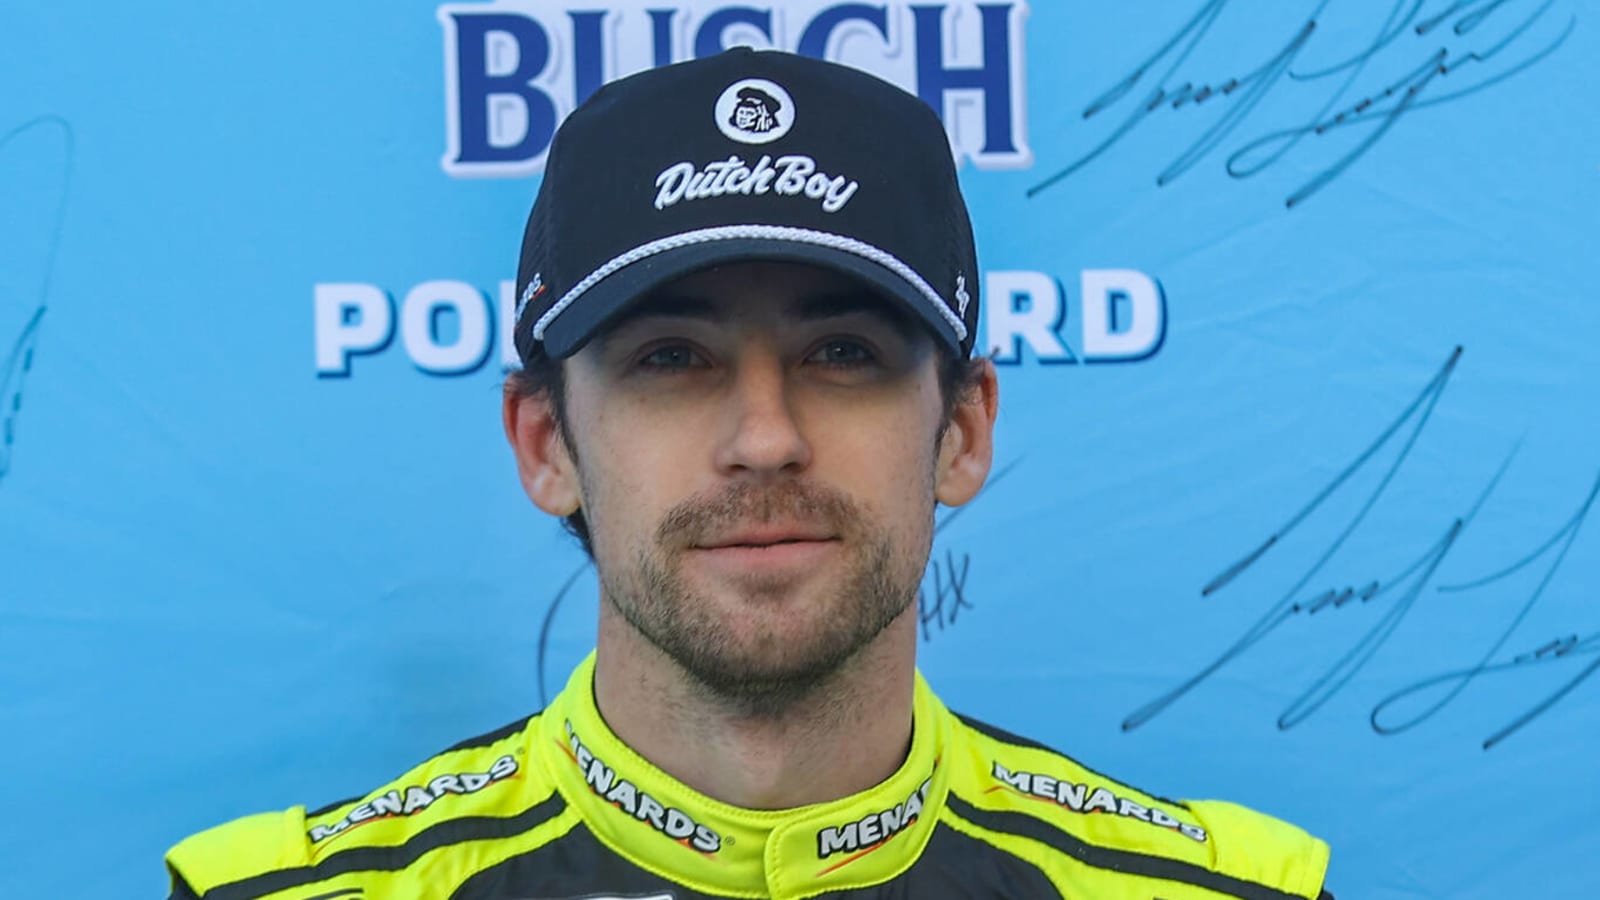 Ryan Blaney aims to take first step towards title defense at Bristol